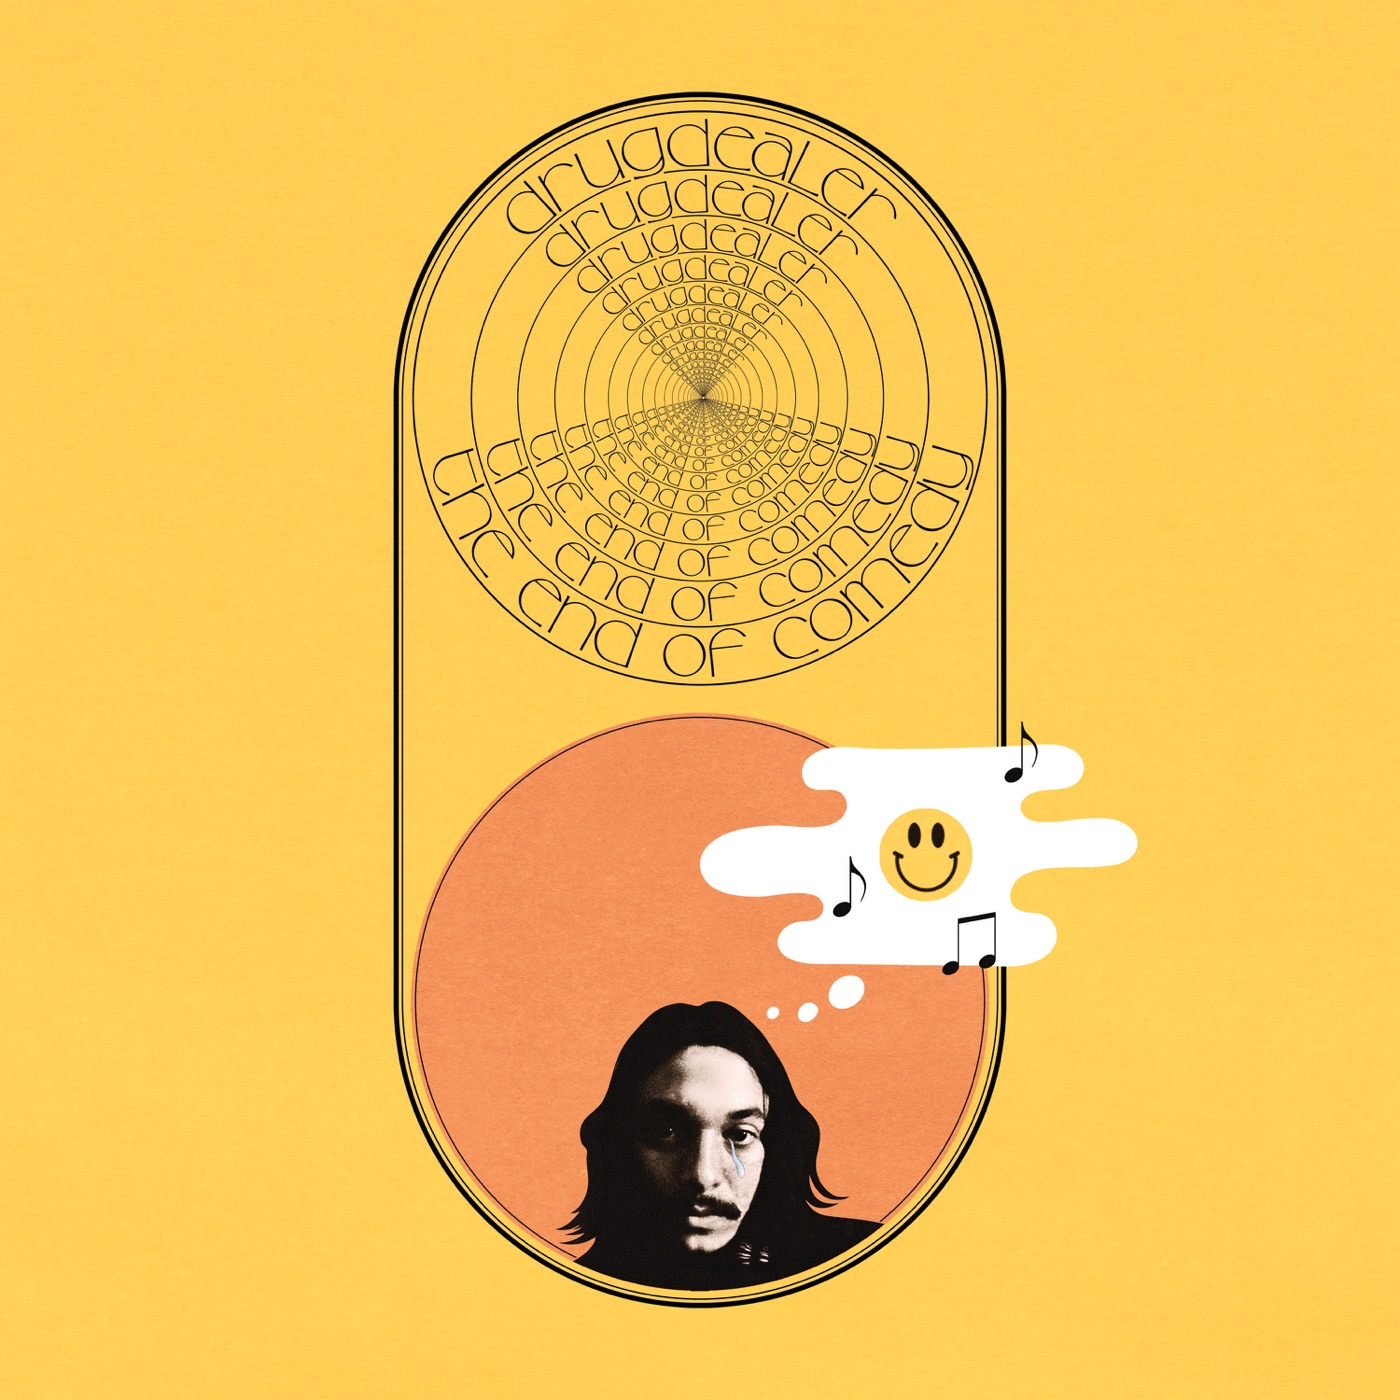 The End Of Comedy by Drugdealer